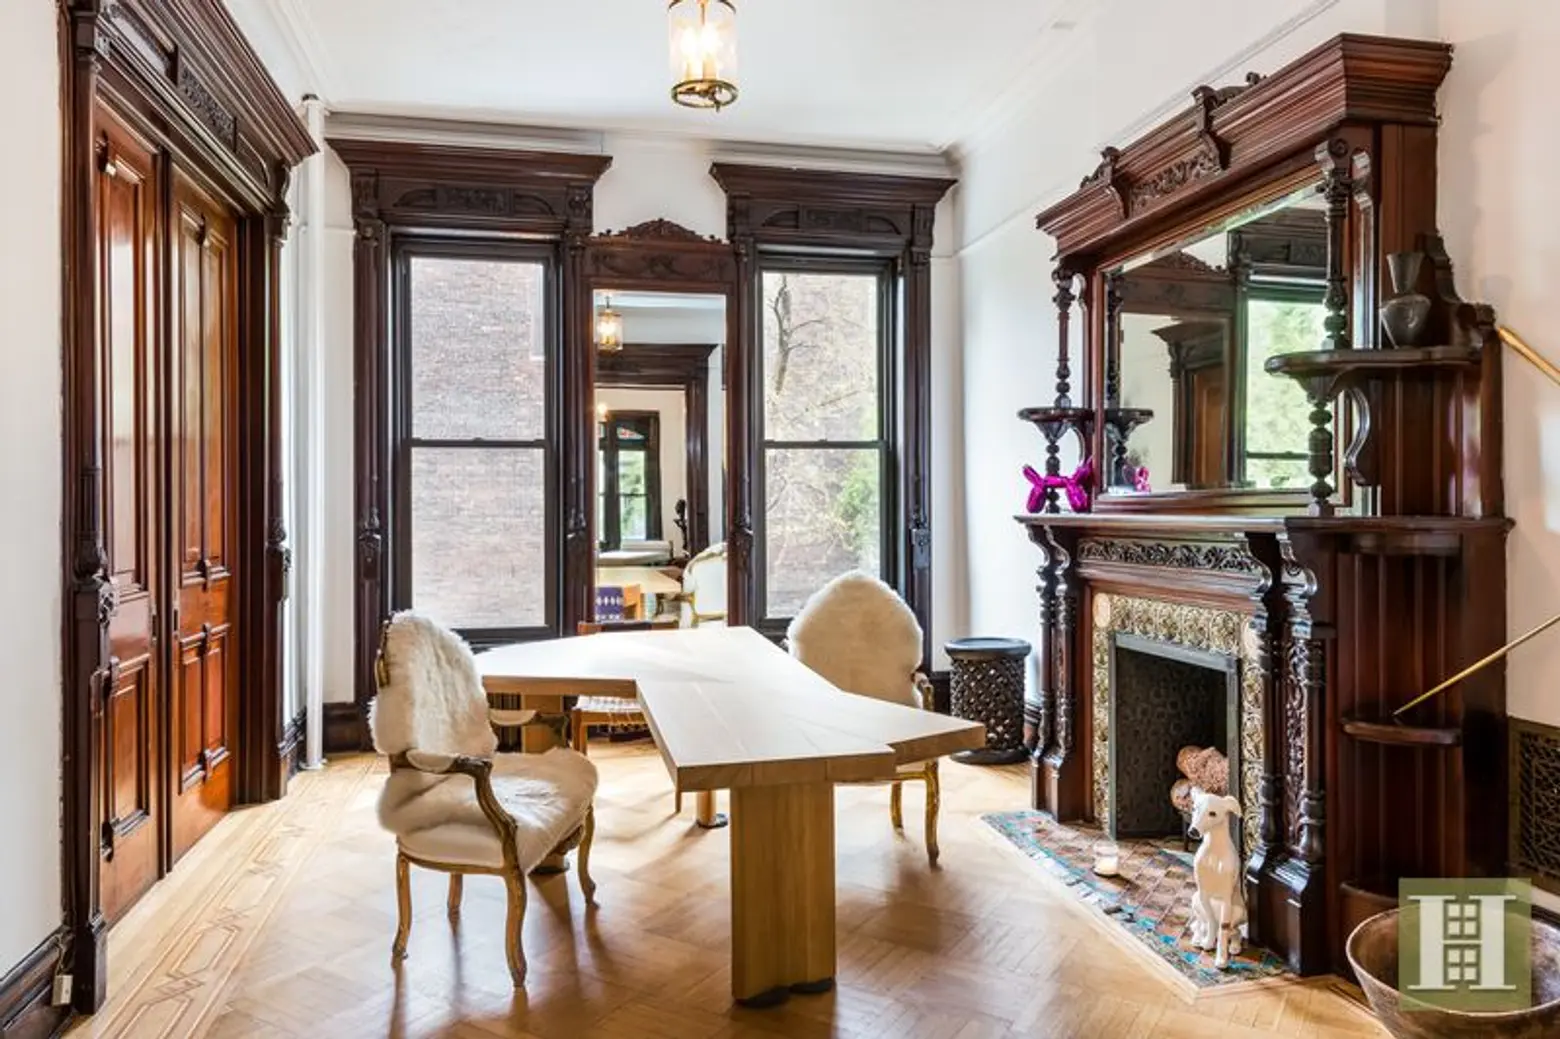 407 Stuyvesant Avenue, Bedford Stuyvestant, Bed-Stuy, Stuyvesant Heights, Historic District, Historic Homes, Townhouse, Brownstone, Jackie Robinson, Brooklyn Townhouse for Sale